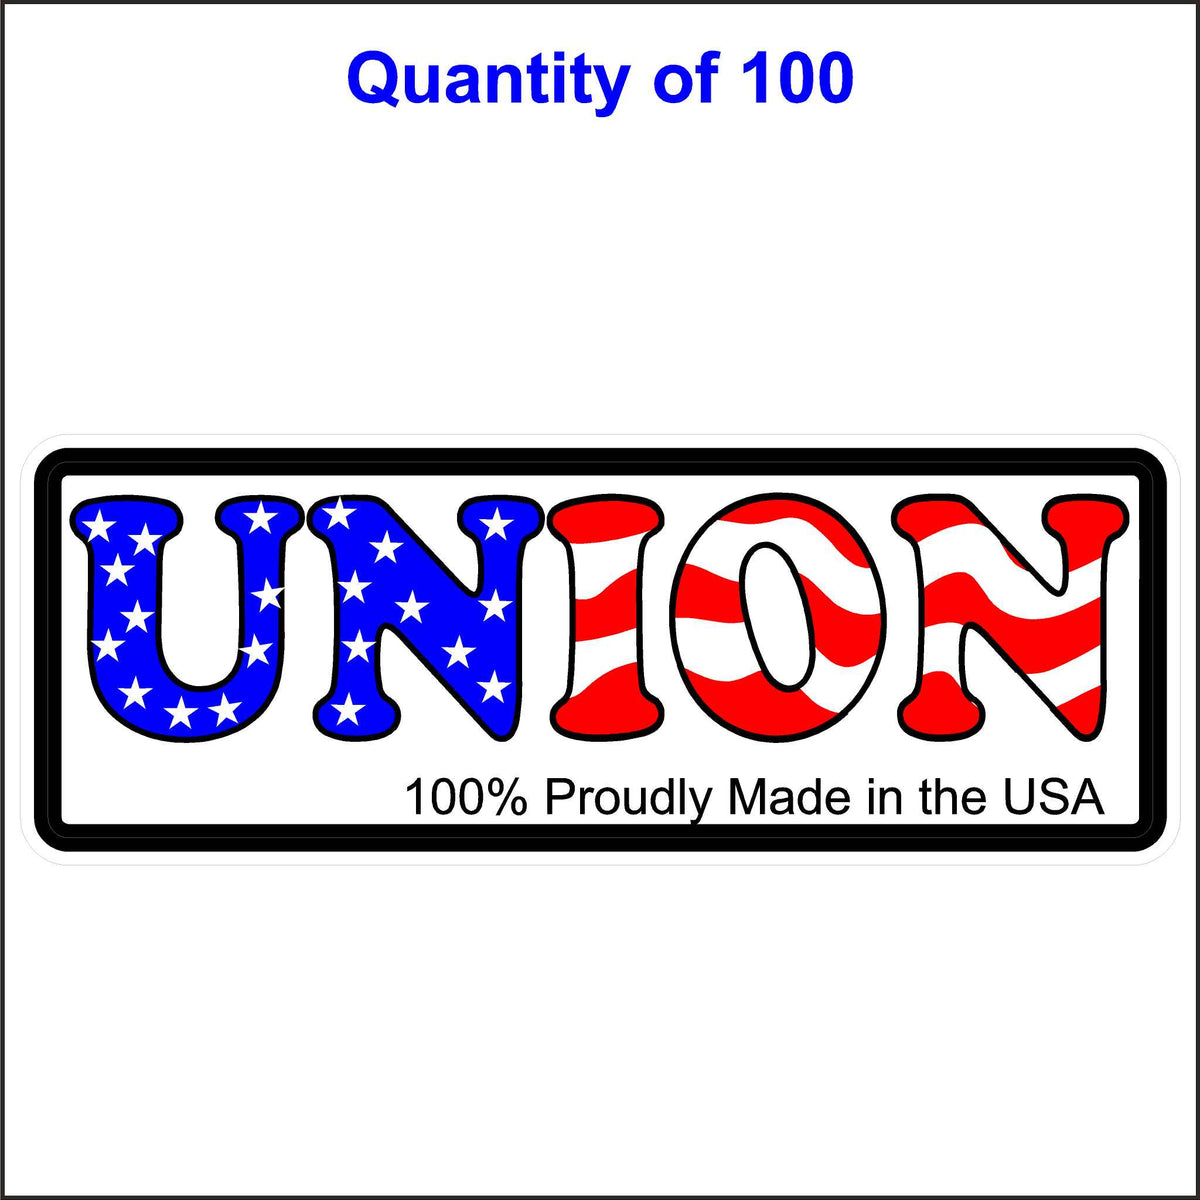 Union Proudly Made in the USA Stickers. 100 Quantity.